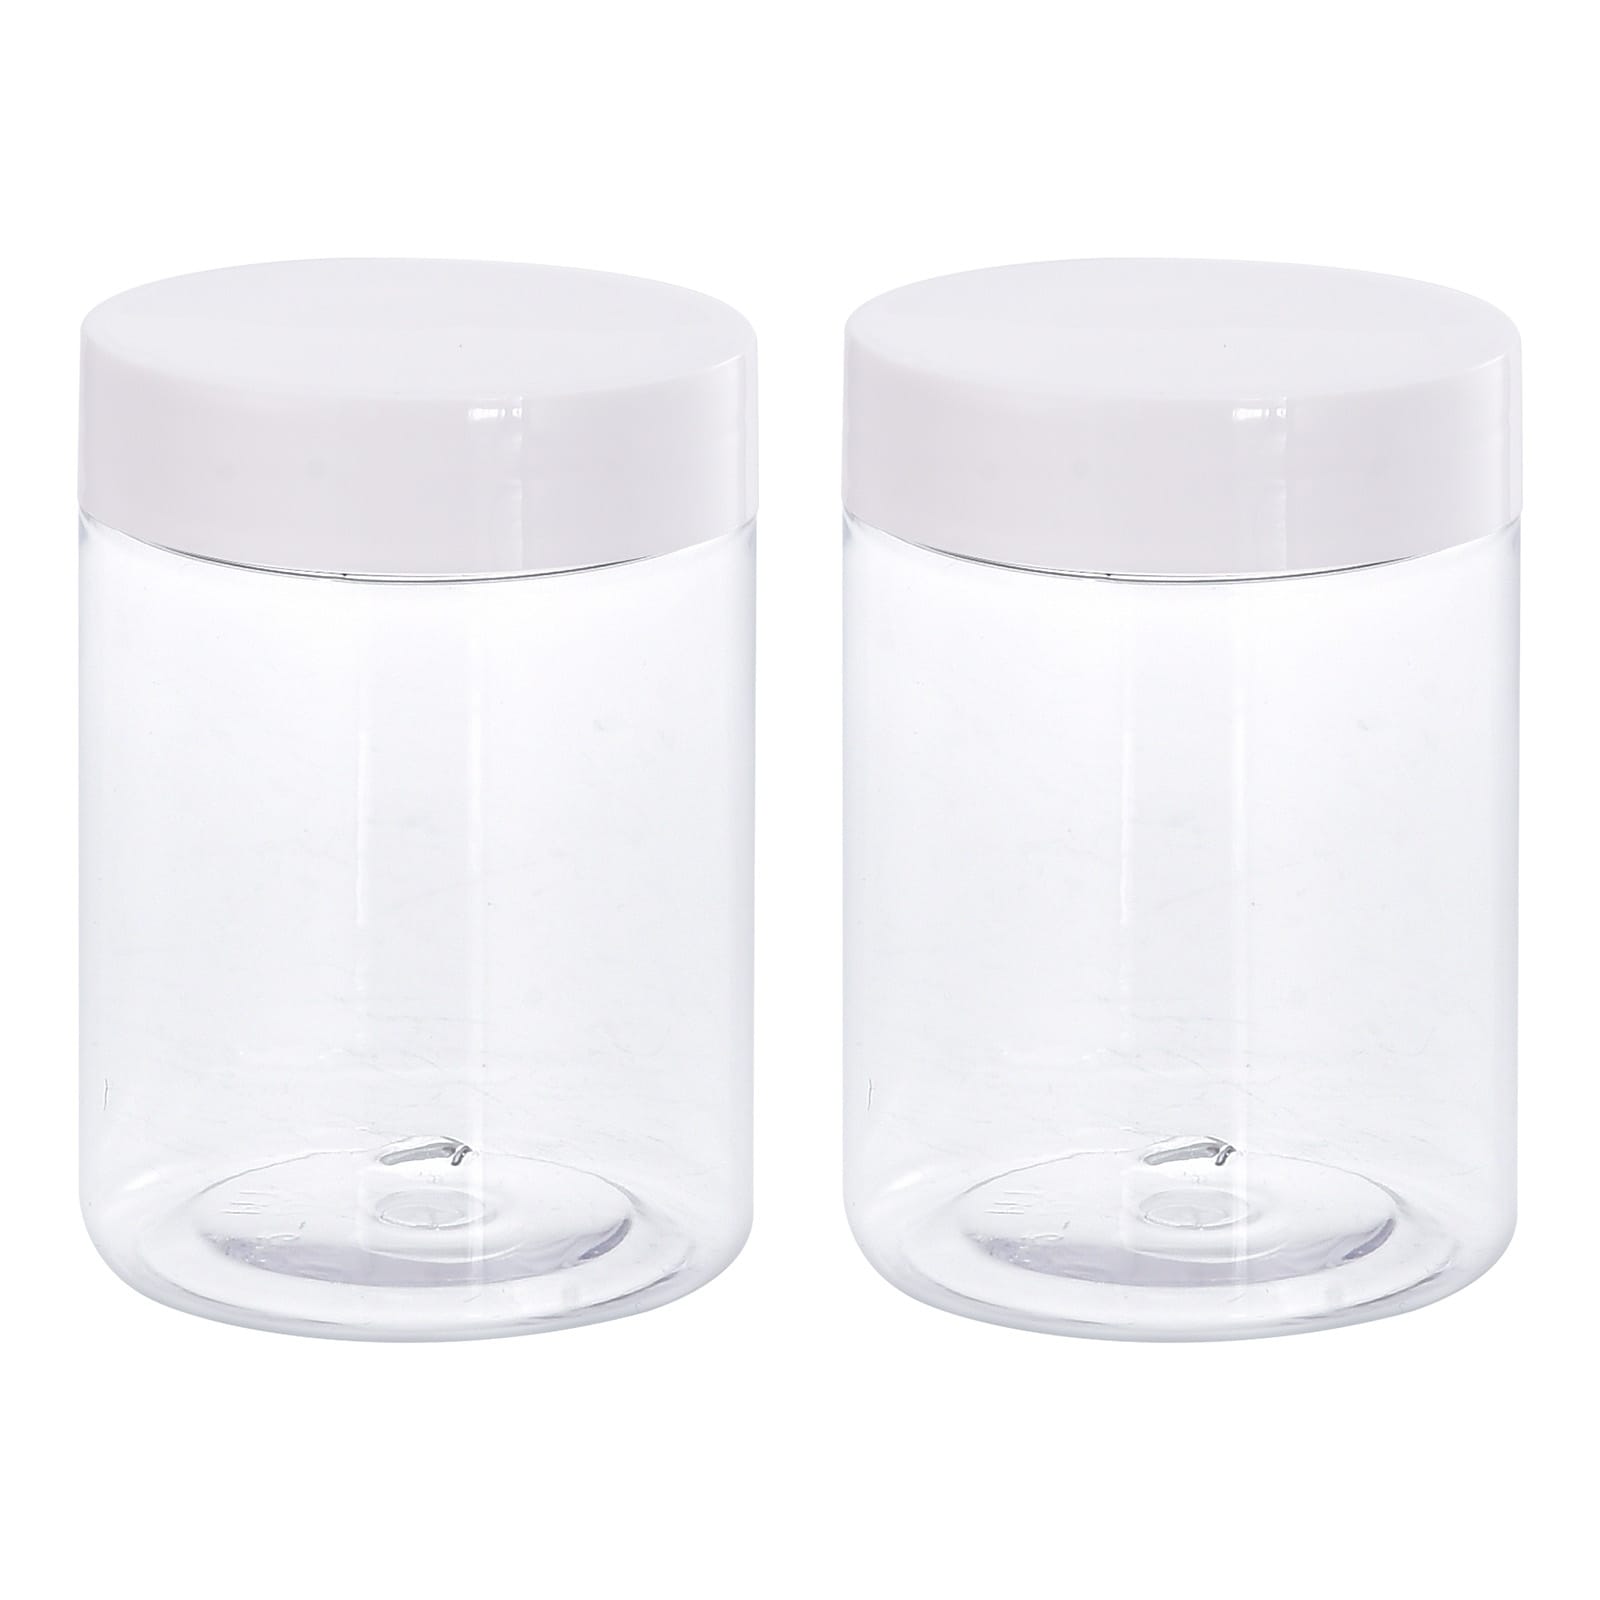 https://ak1.ostkcdn.com/images/products/is/images/direct/a5856d6ecd101584221e55661e774051057d4811/Round-Plastic-Jars-with-White-Screw-Top-Lid%2C-2Pcs.jpg